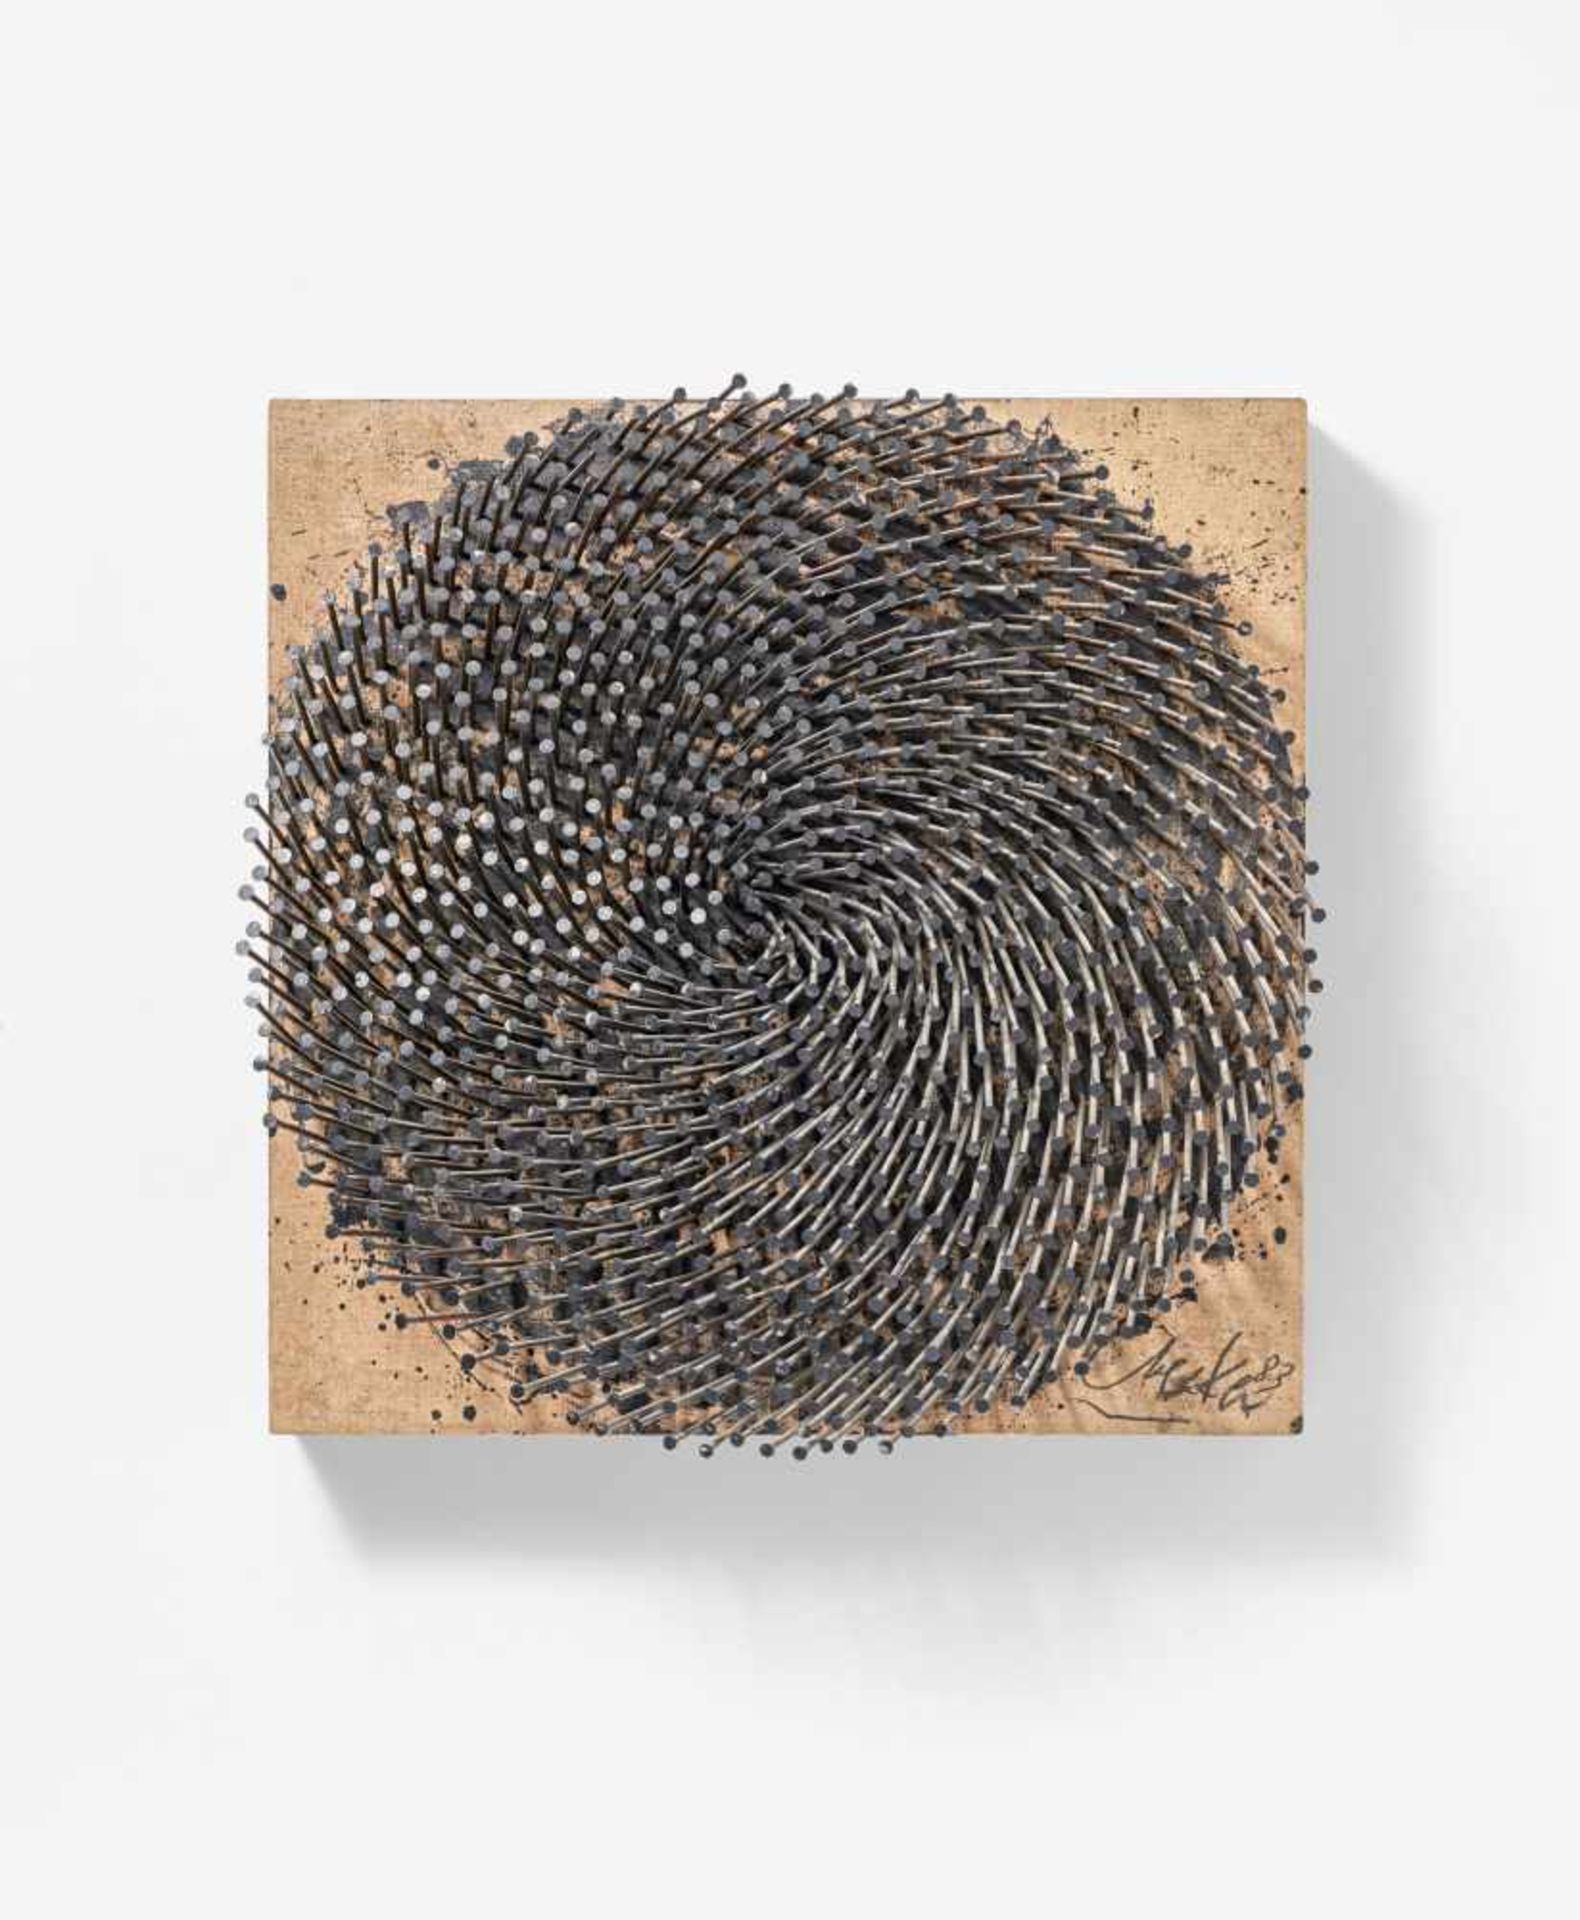 Uecker, Günther1930 Wendorf"Dunkle Spirale". 1983. Hammered nails and paint on canvas, pulled over